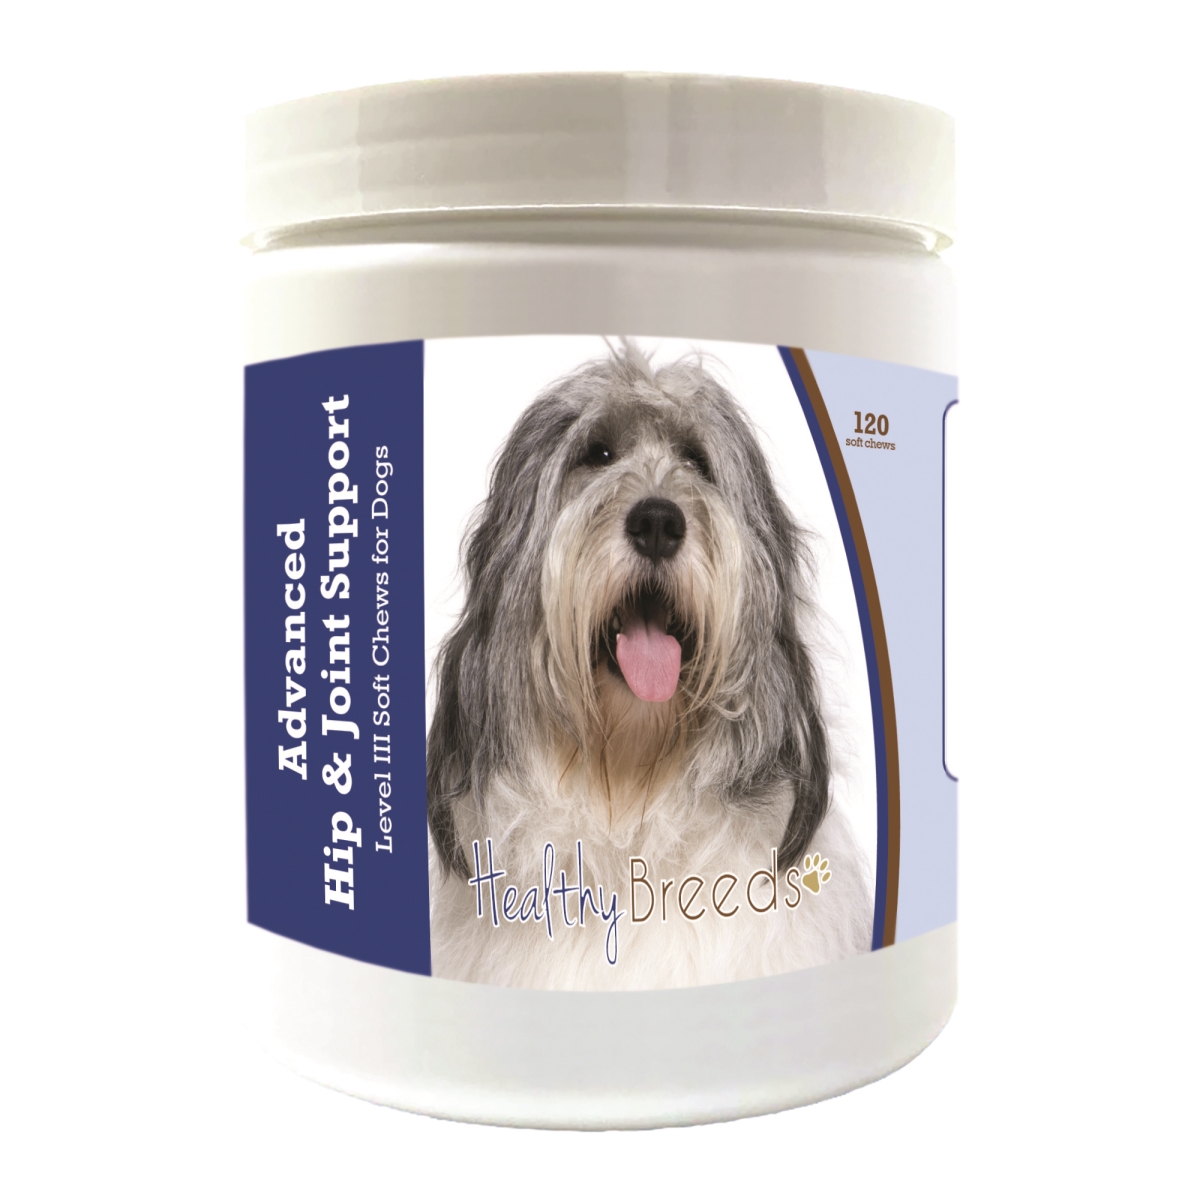 Picture of Healthy Breeds 192959898941 Polish Lowland Sheepdog Advanced Hip & Joint Support Level III Soft Chews for Dogs